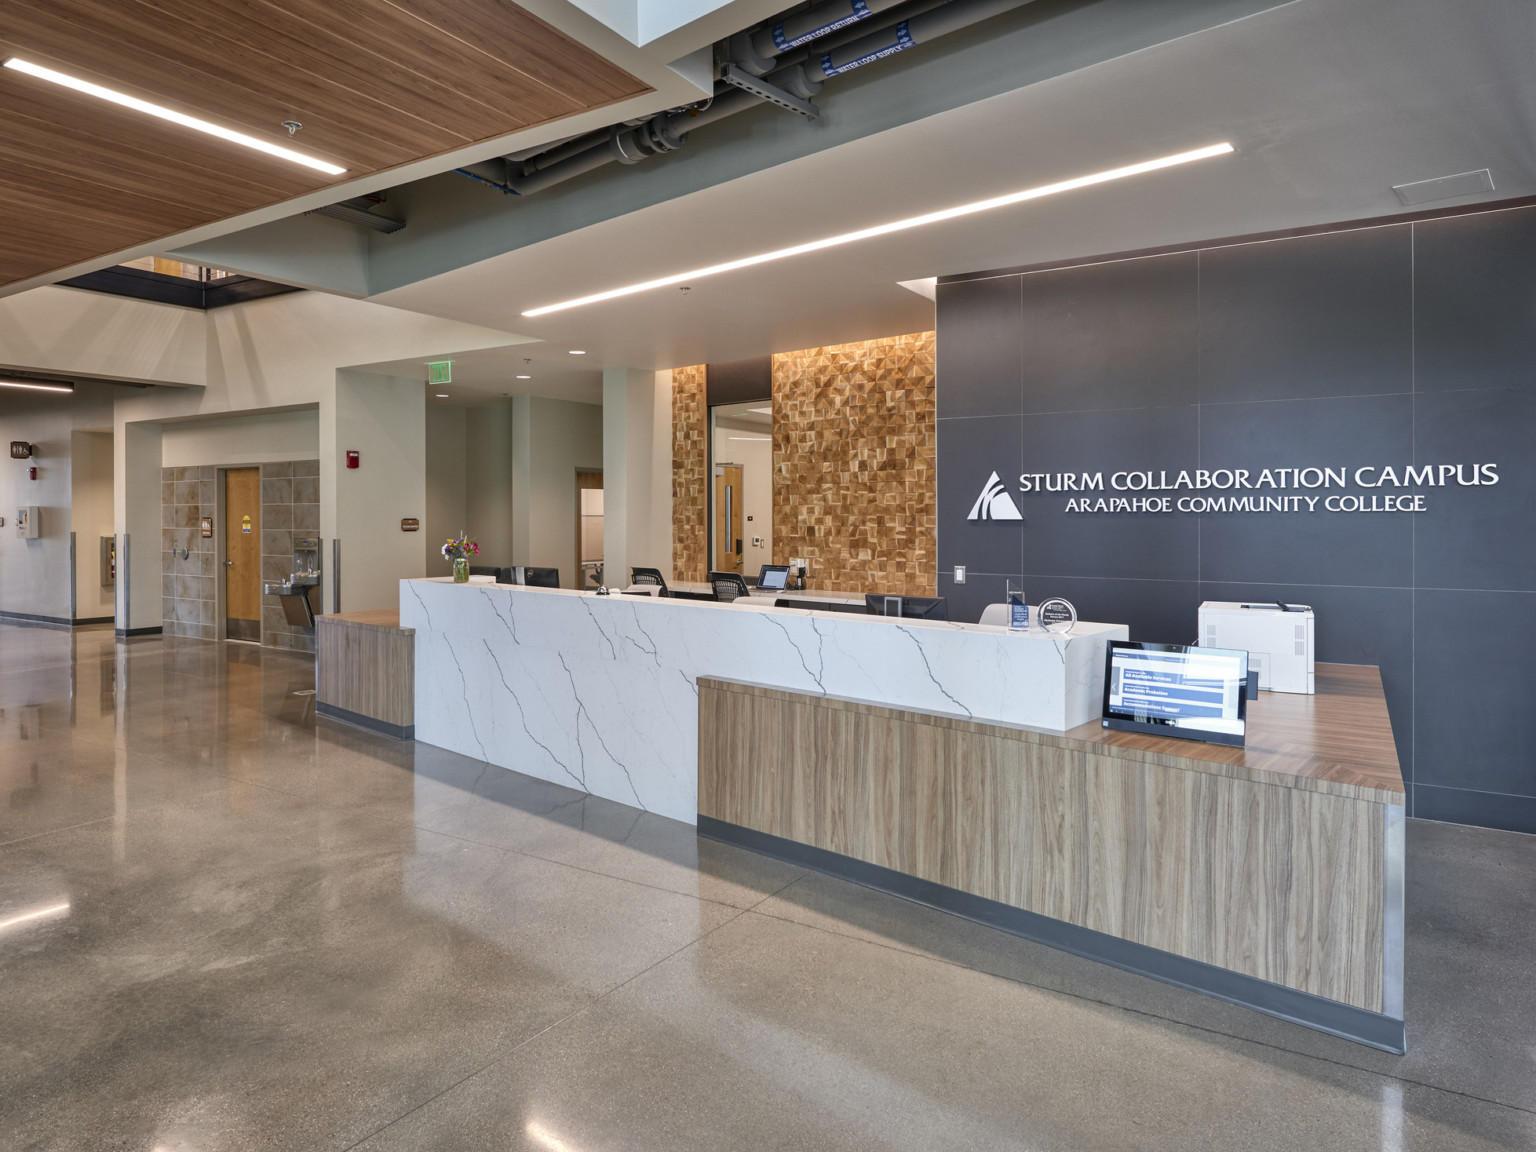 Reception area with white marble desk with wood accents to side in front of stone wall with Sturm Collaboration Campus sign.